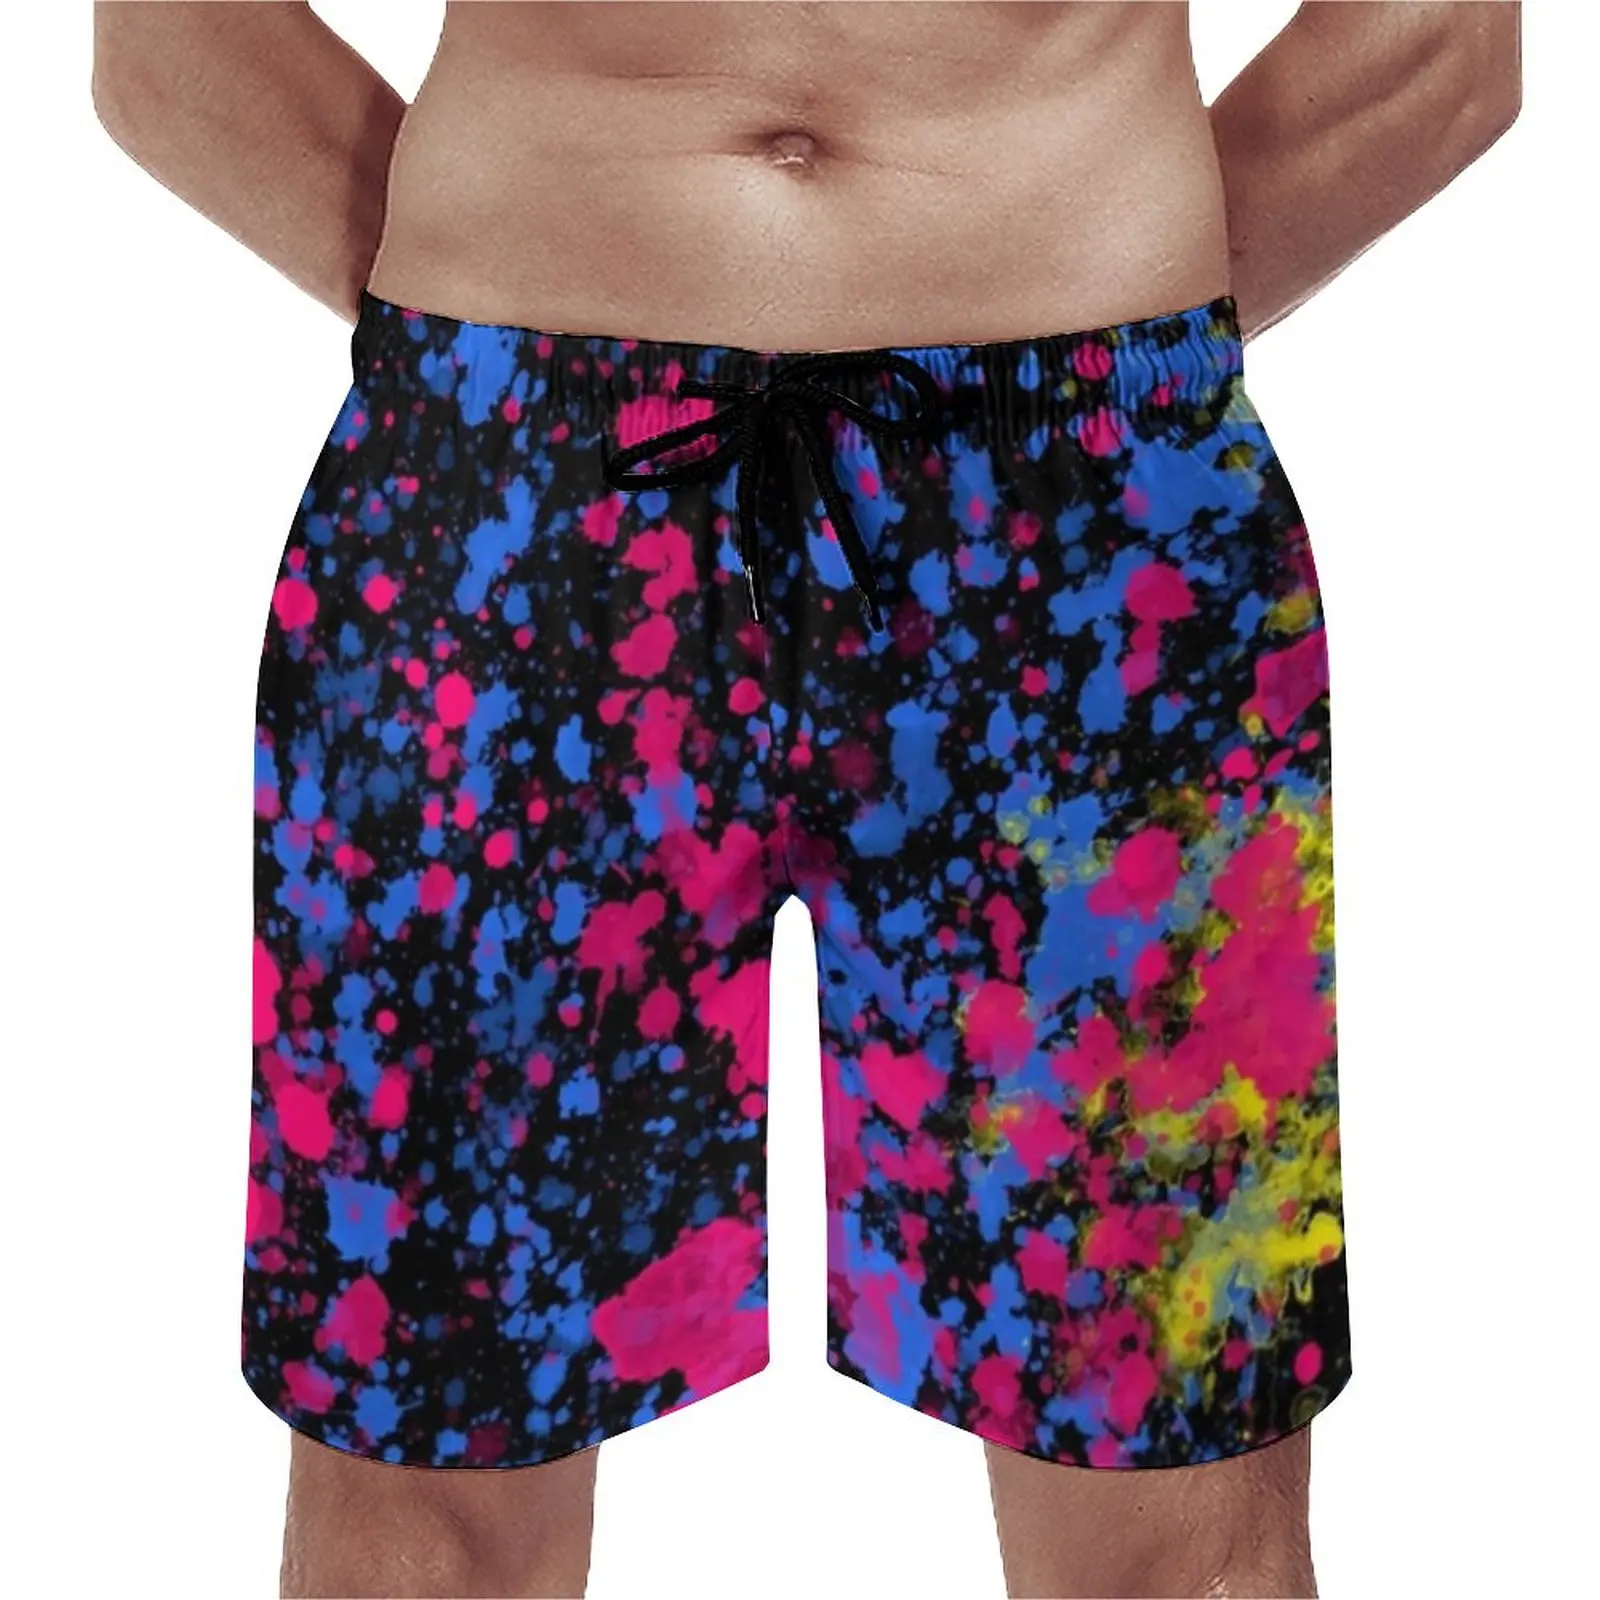 

Summer Board Shorts Neon Paint Splatter Sports Fitness Abstract Graffiti Beach Shorts Casual Quick Drying Beach Trunks Plus Size